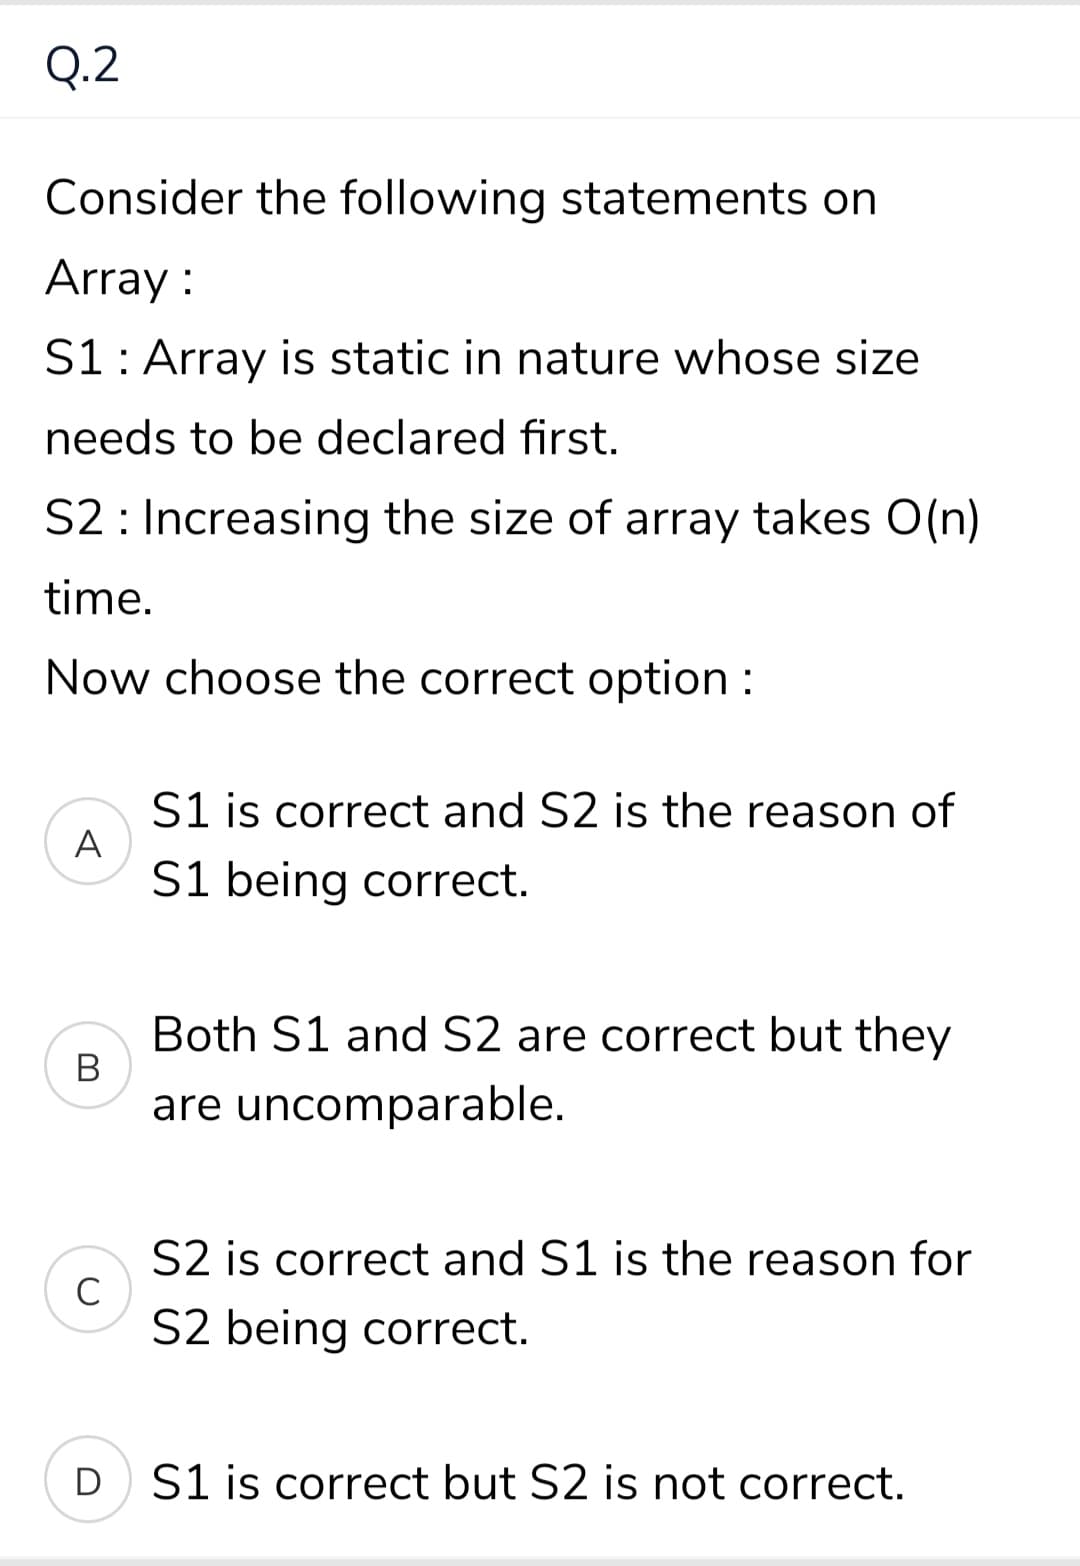 Q.2
Consider the following statements on
Array :
S1: Array is static in nature whose size
needs to be declared first.
S2 : Increasing the size of array takes O(n)
time.
Now choose the correct option :
S1 is correct and S2 is the reason of
A
S1 being correct.
Both S1 and S2 are correct but they
В
are uncomparable.
S2 is correct and S1 is the reason for
C
S2 being correct.
D S1 is correct but S2 is not correct.
